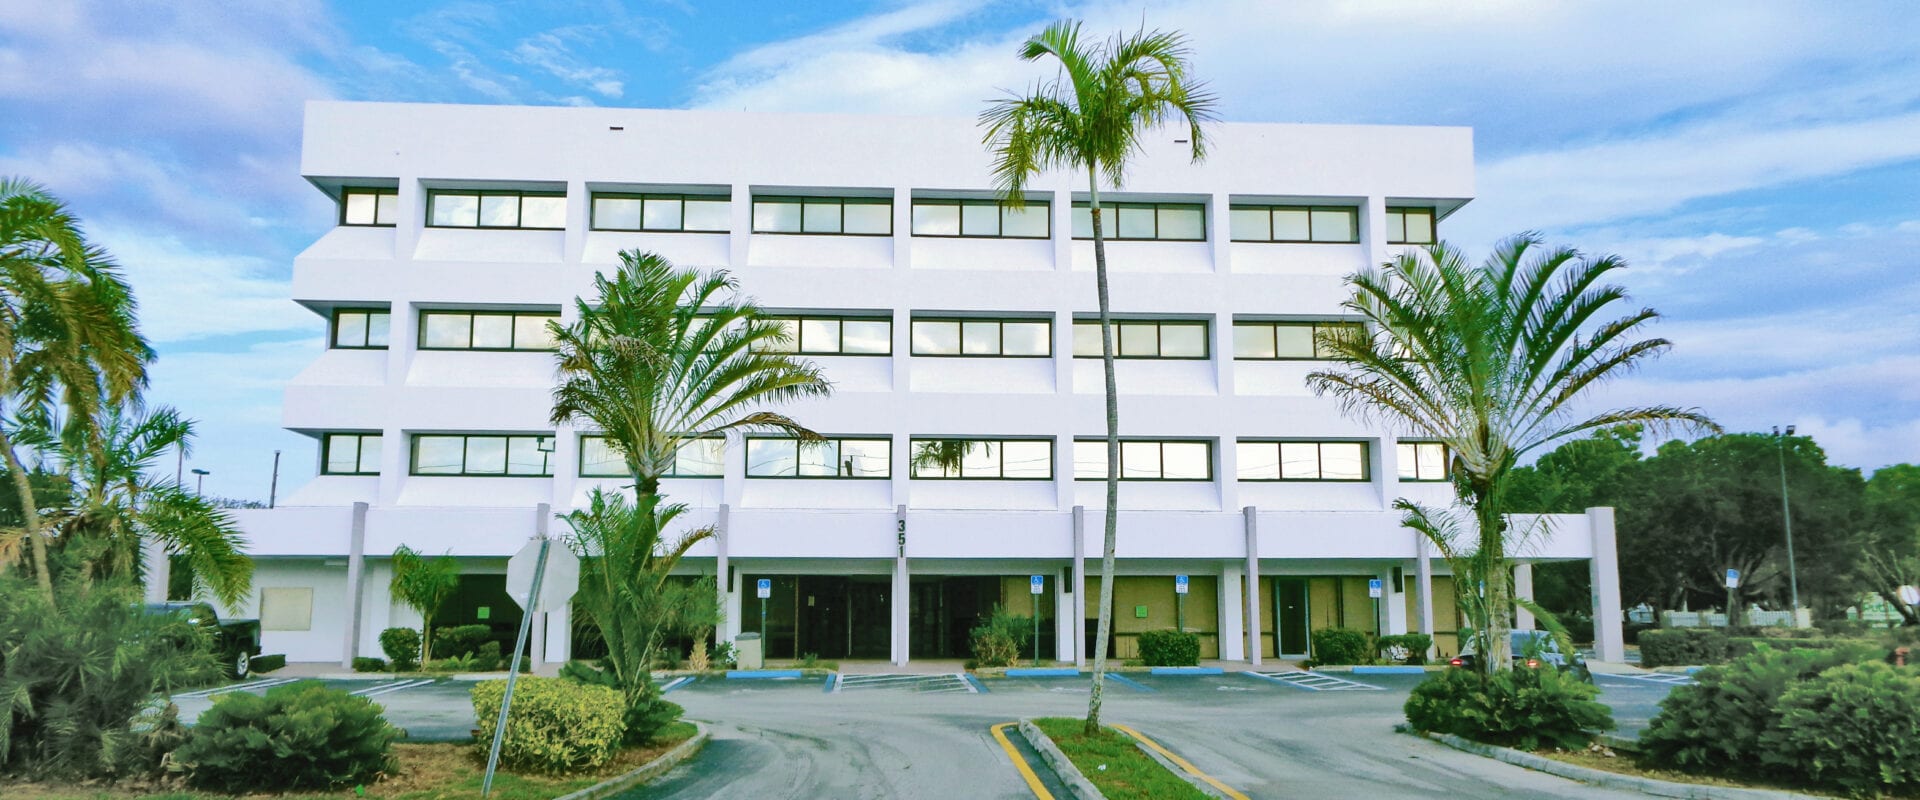 For Lease Office Space Pompano Beach 268 SF